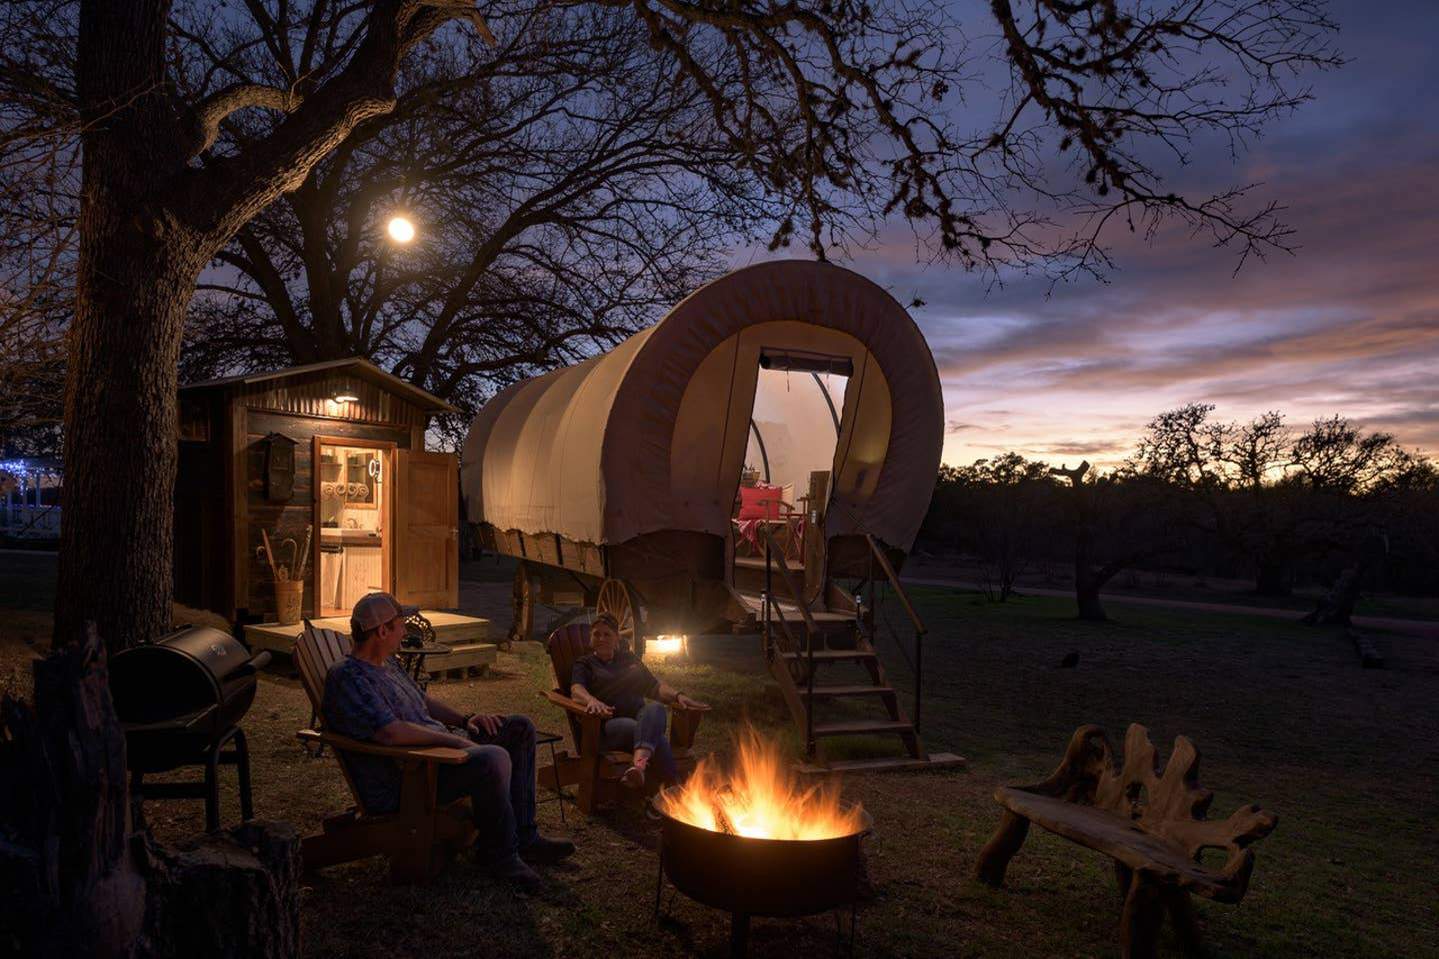 Glamp it up Texas-style in this covered wagon listed on Airbnb